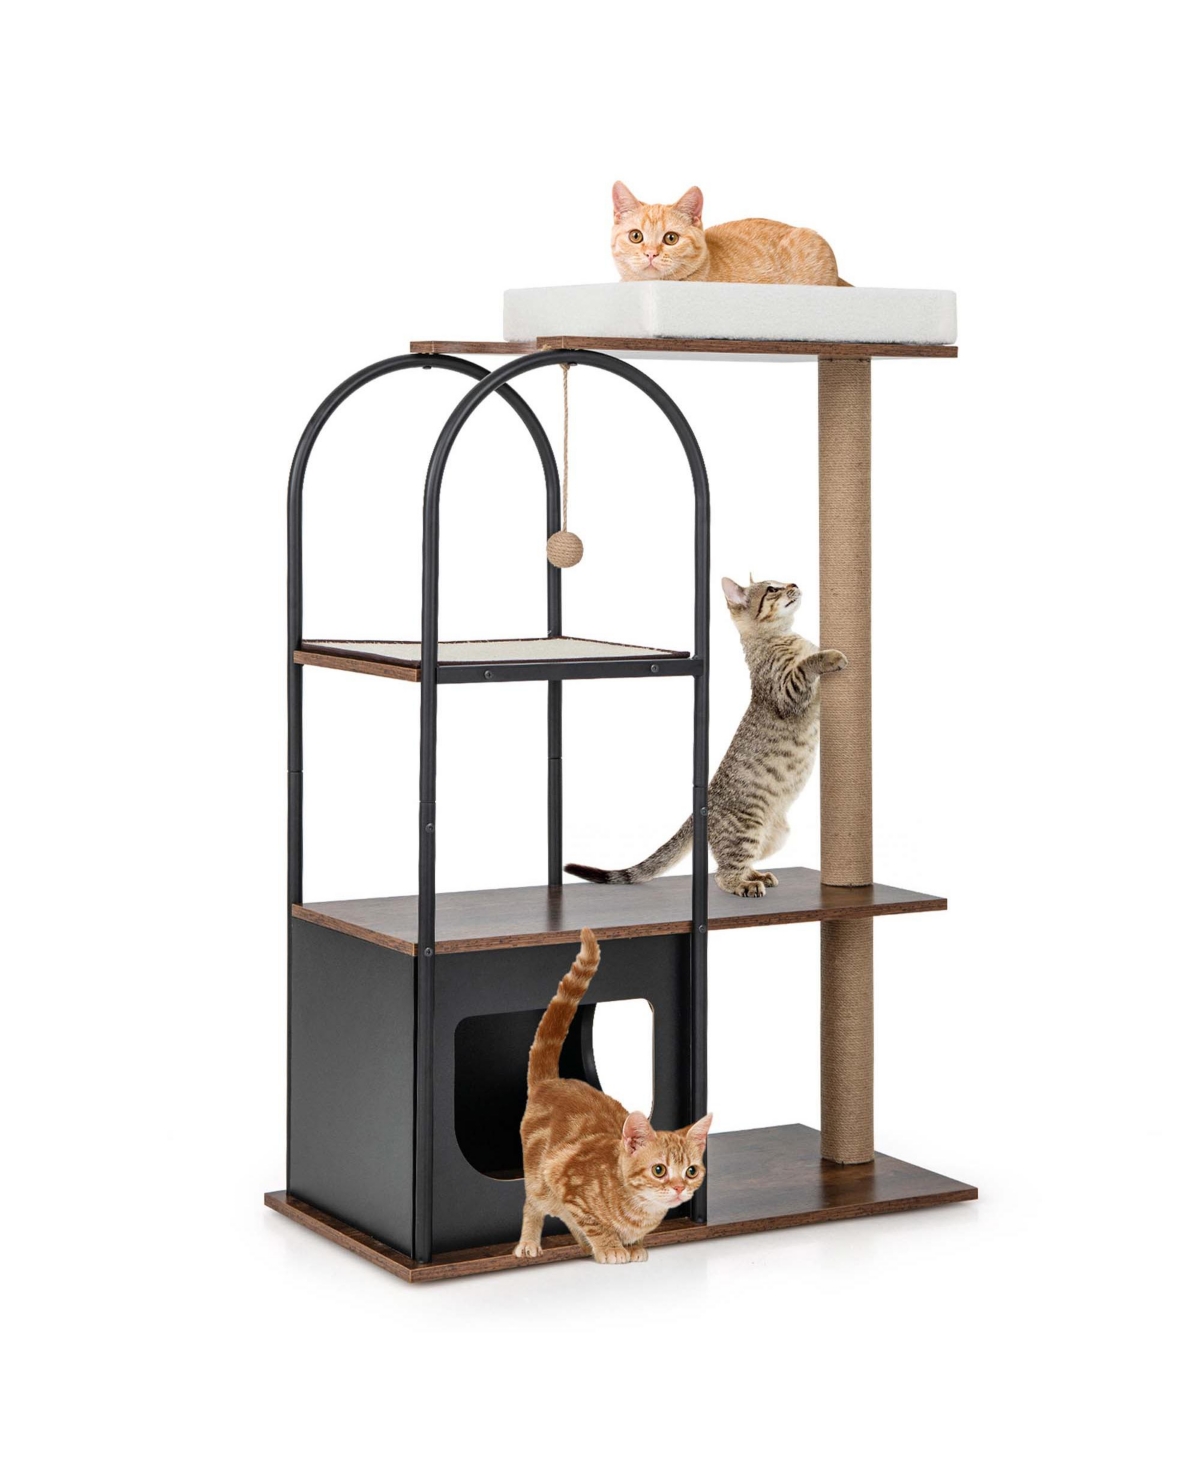 47" Large Cat Tree Tower with Top Perch Cat Bed Cat Condo Scratching Posts Indoor - White